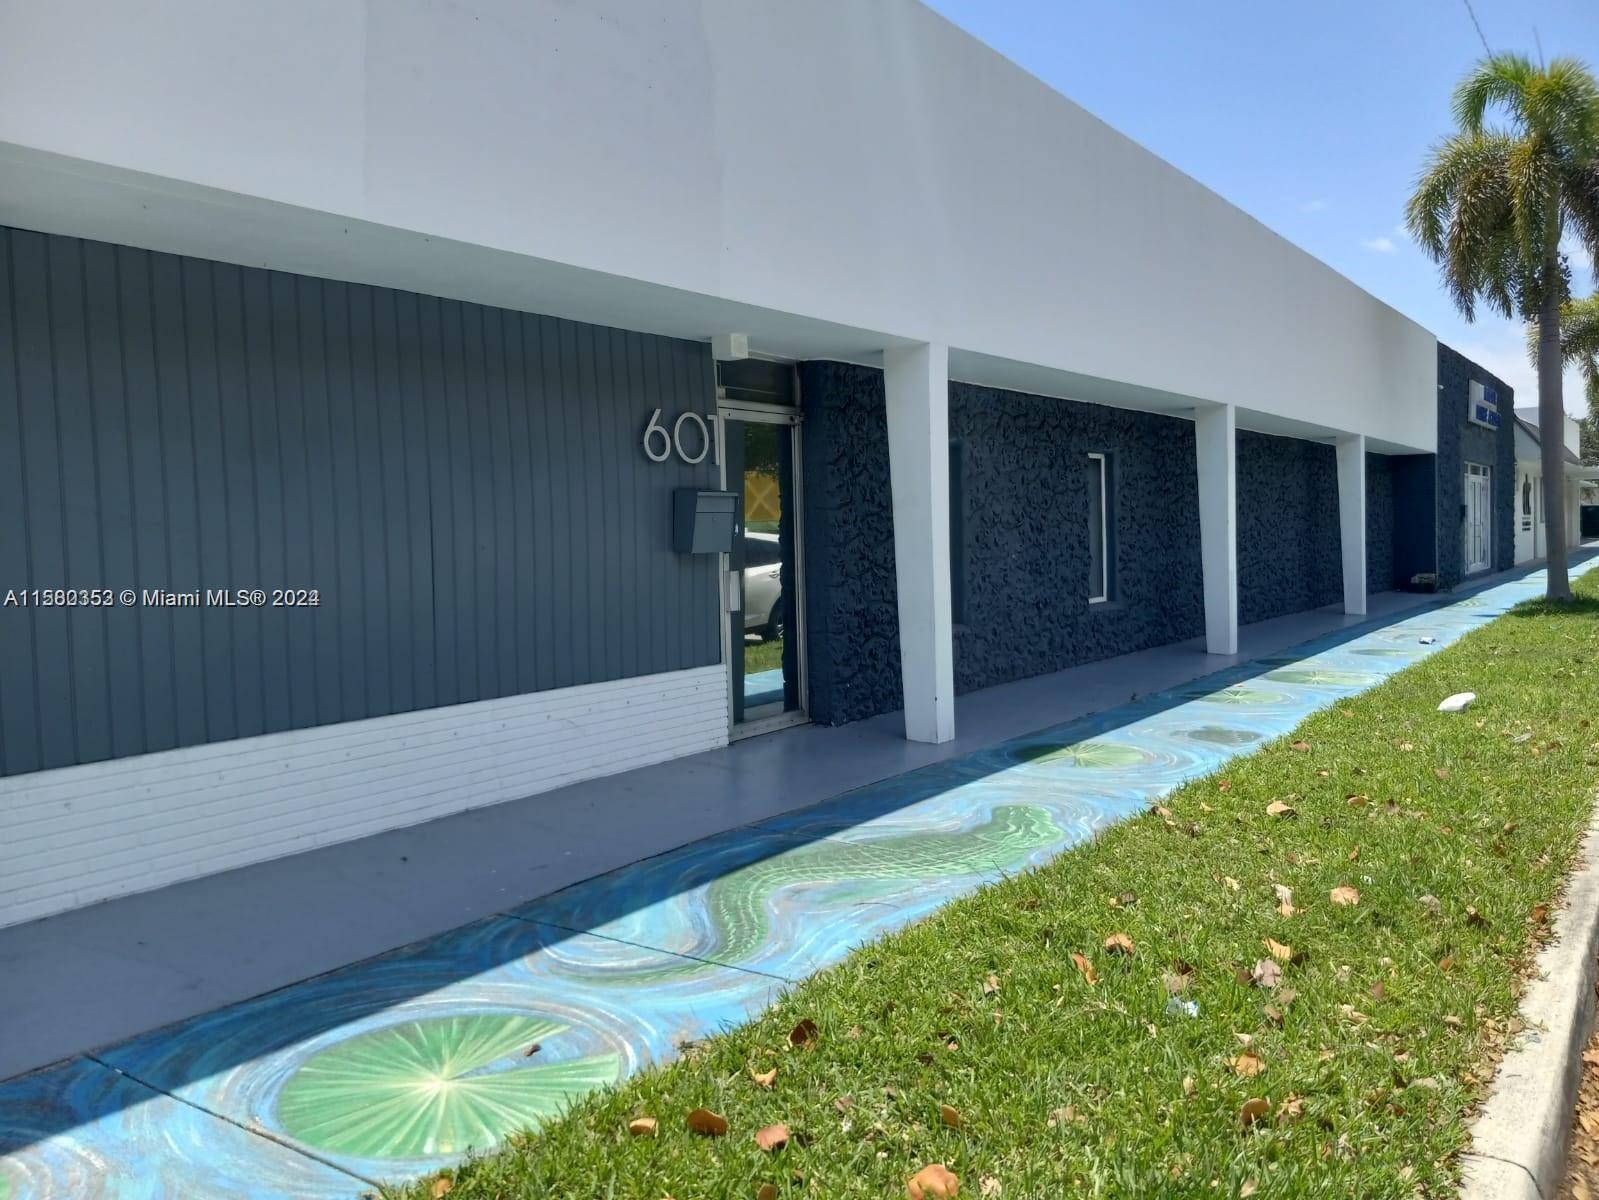 Photo of 601 S 21st Ave in Hollywood, FL